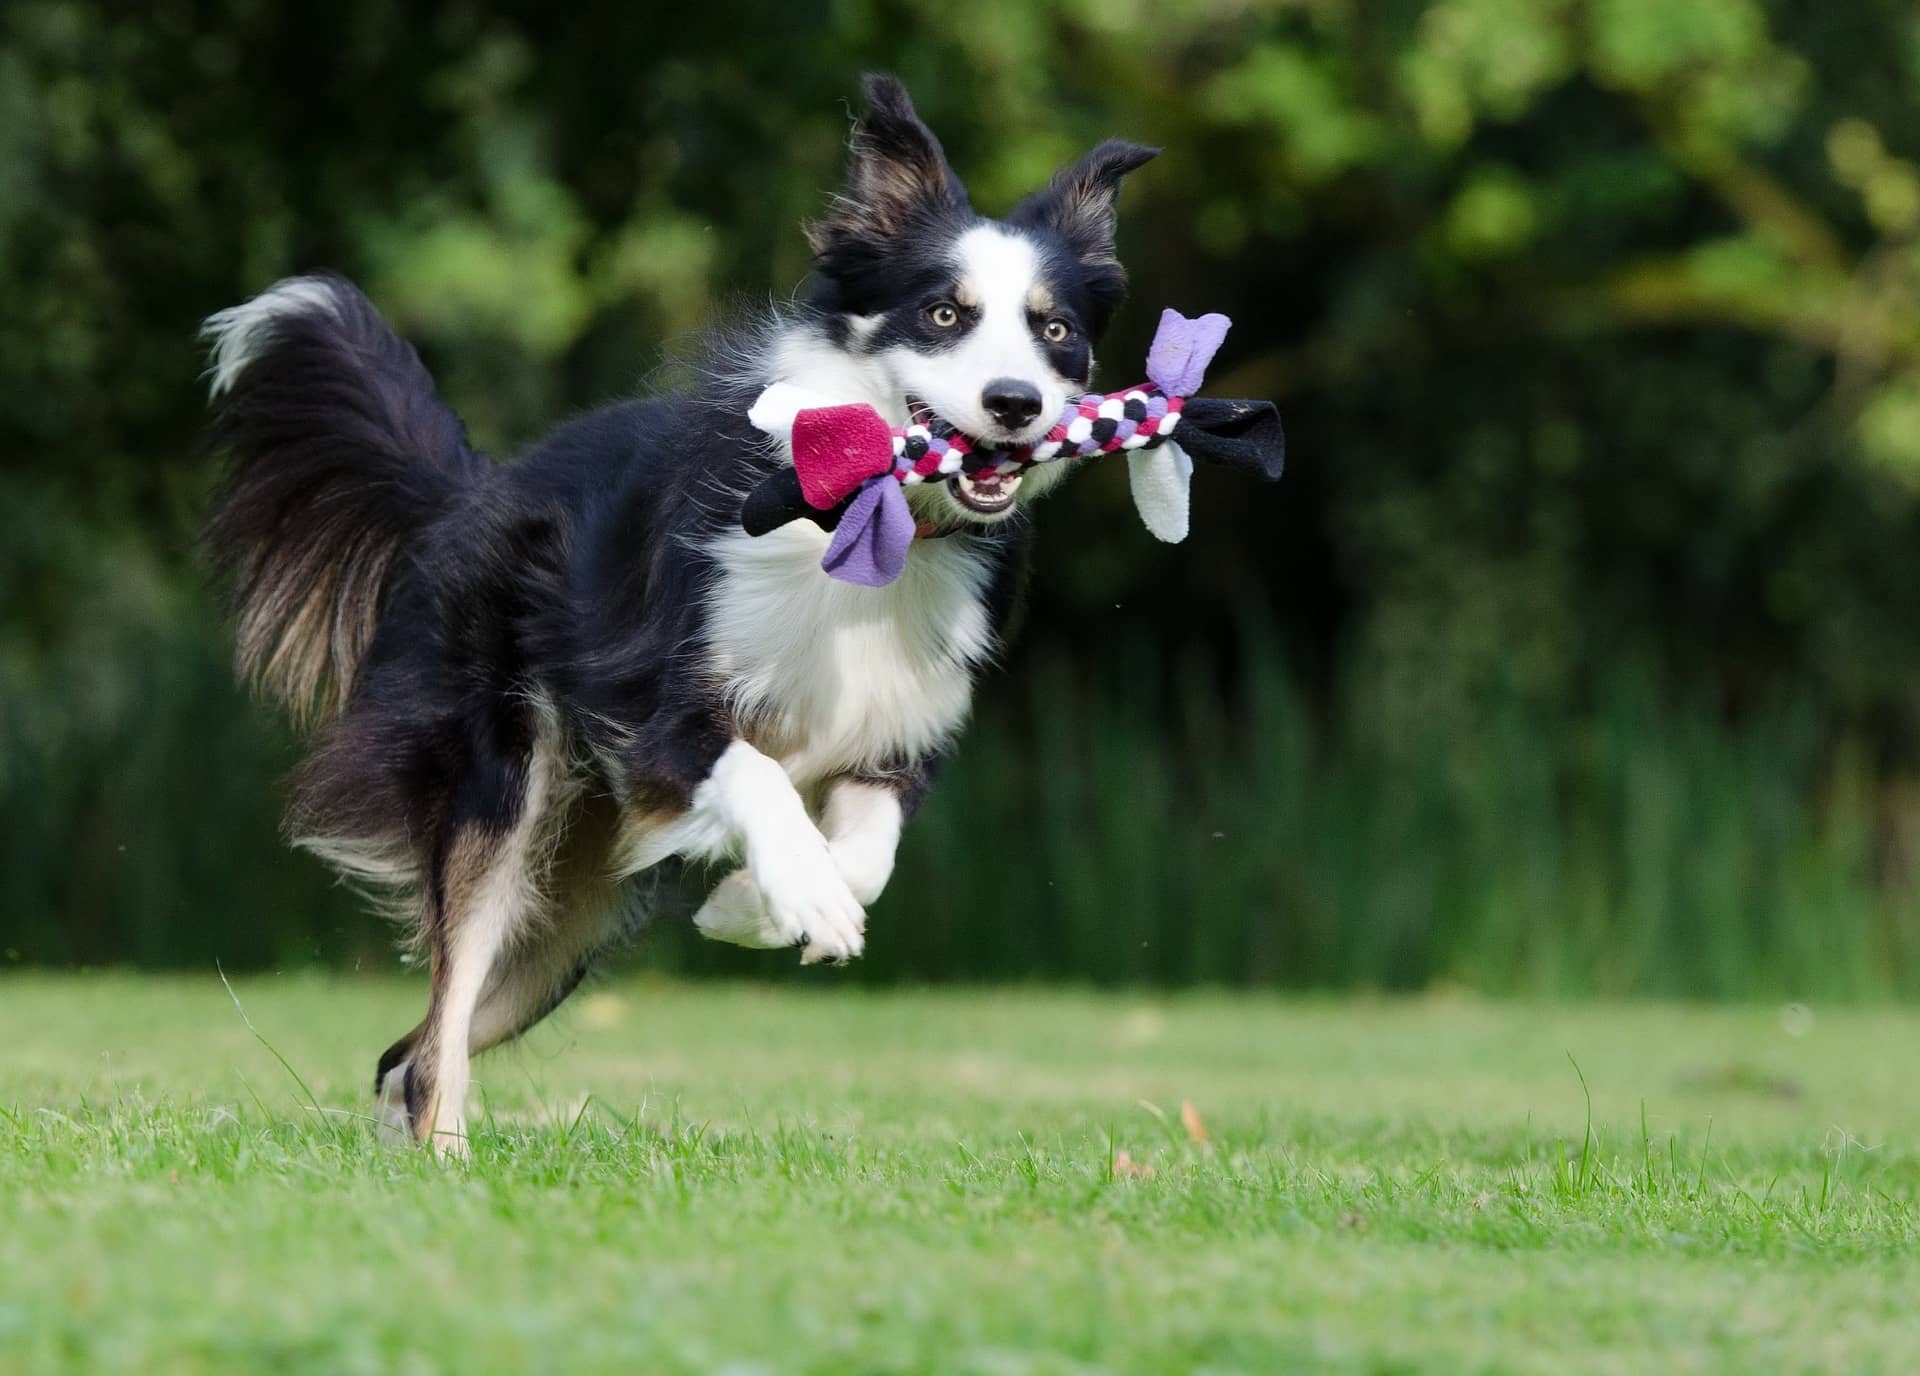 The Importance of Consistency in Border Collie Training